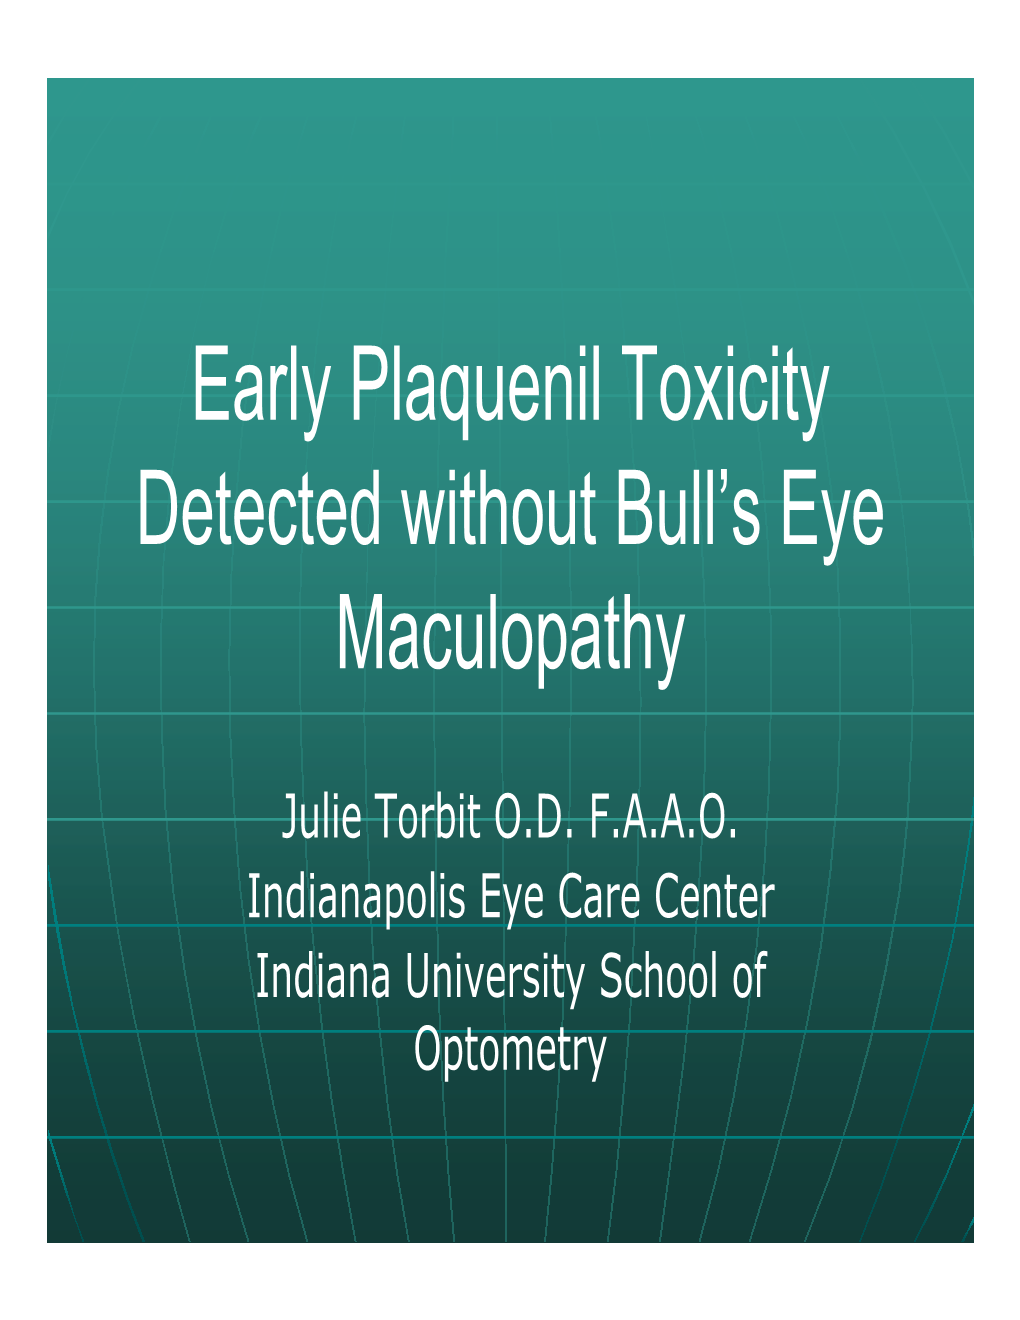 Early Plaquenil Toxicity Detected Without Bull's Eye Maculopathy